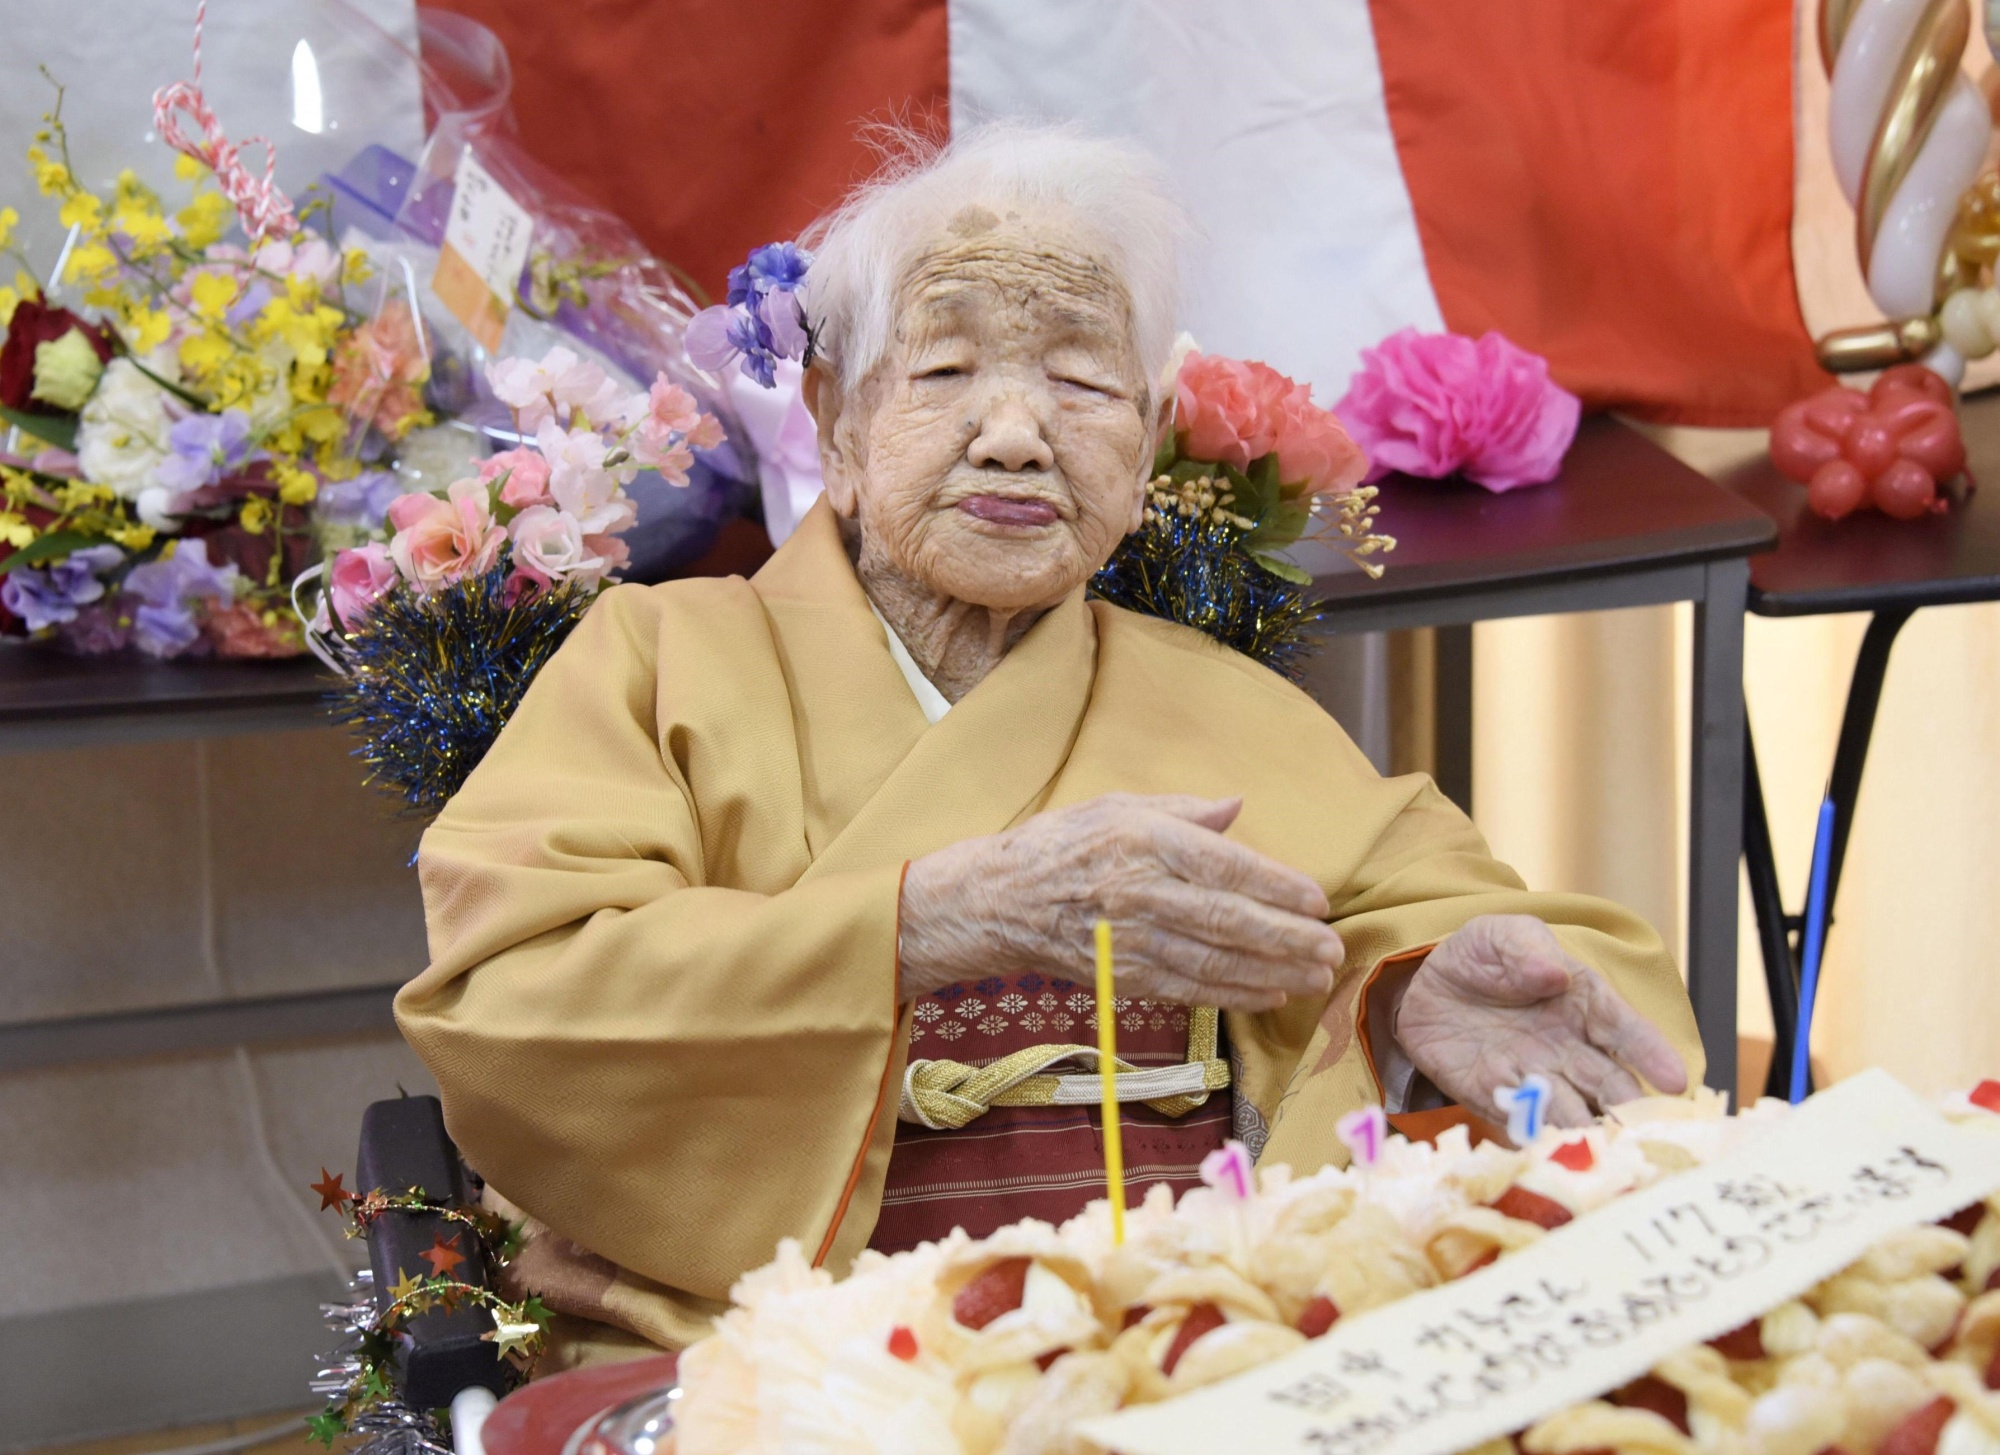 Kane Tanaka, the world's oldest person, who turned 117 on Thursday, is the center of attention at a party to mark the event held Sunday at the nursing home where she lives in Fukuoka. | KYODO